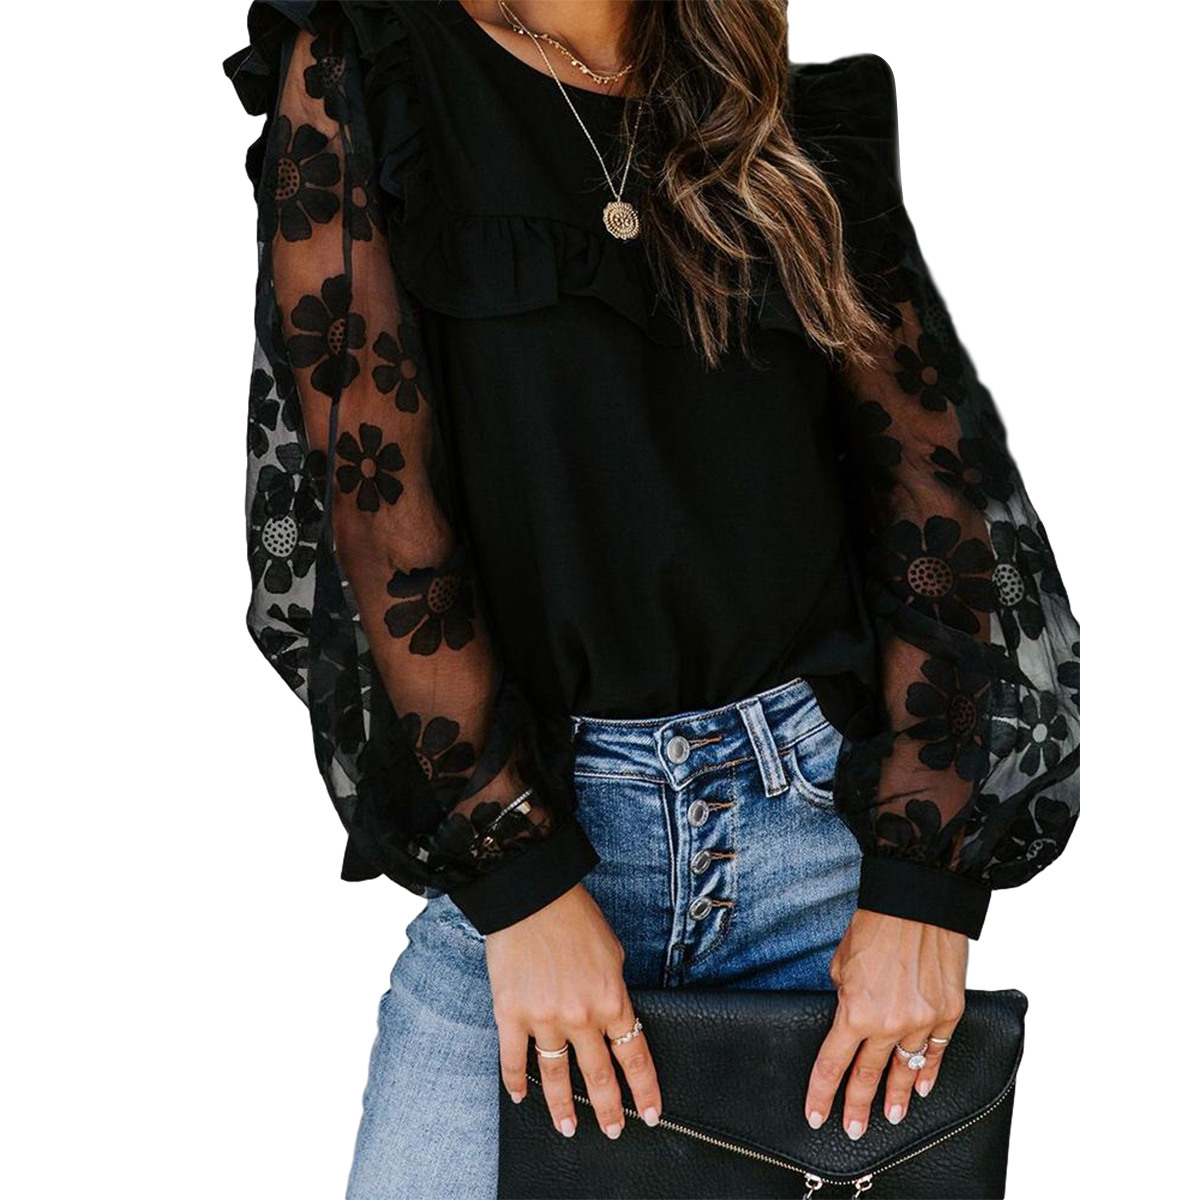 Women Fashion Mesh Patchwork Round Neck Long Sleeve Blouse Black Lace Falbala Transparent Flower Bubble Sleeve Pullover Tops